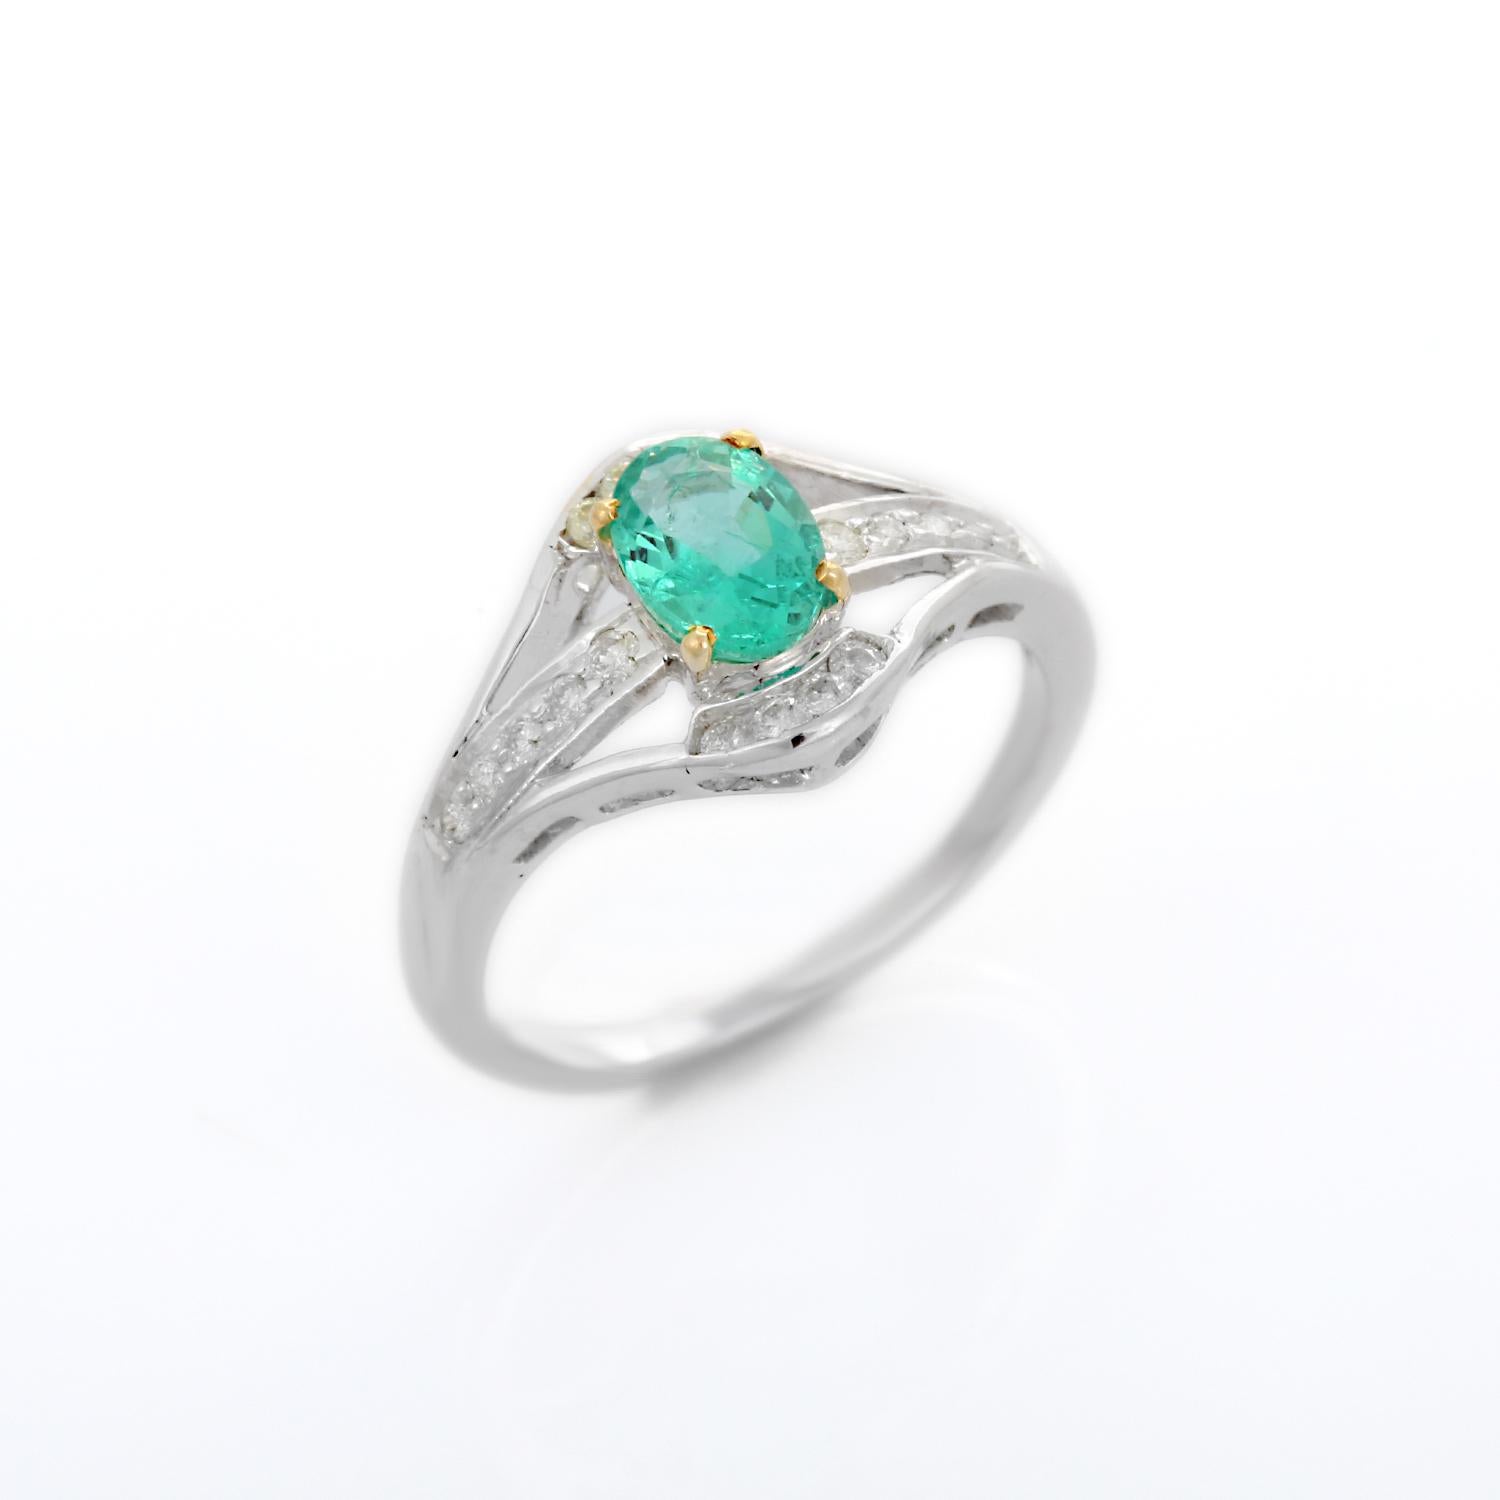 For Sale:  Emerald and Diamond Ring in 18 Karat White Gold  10